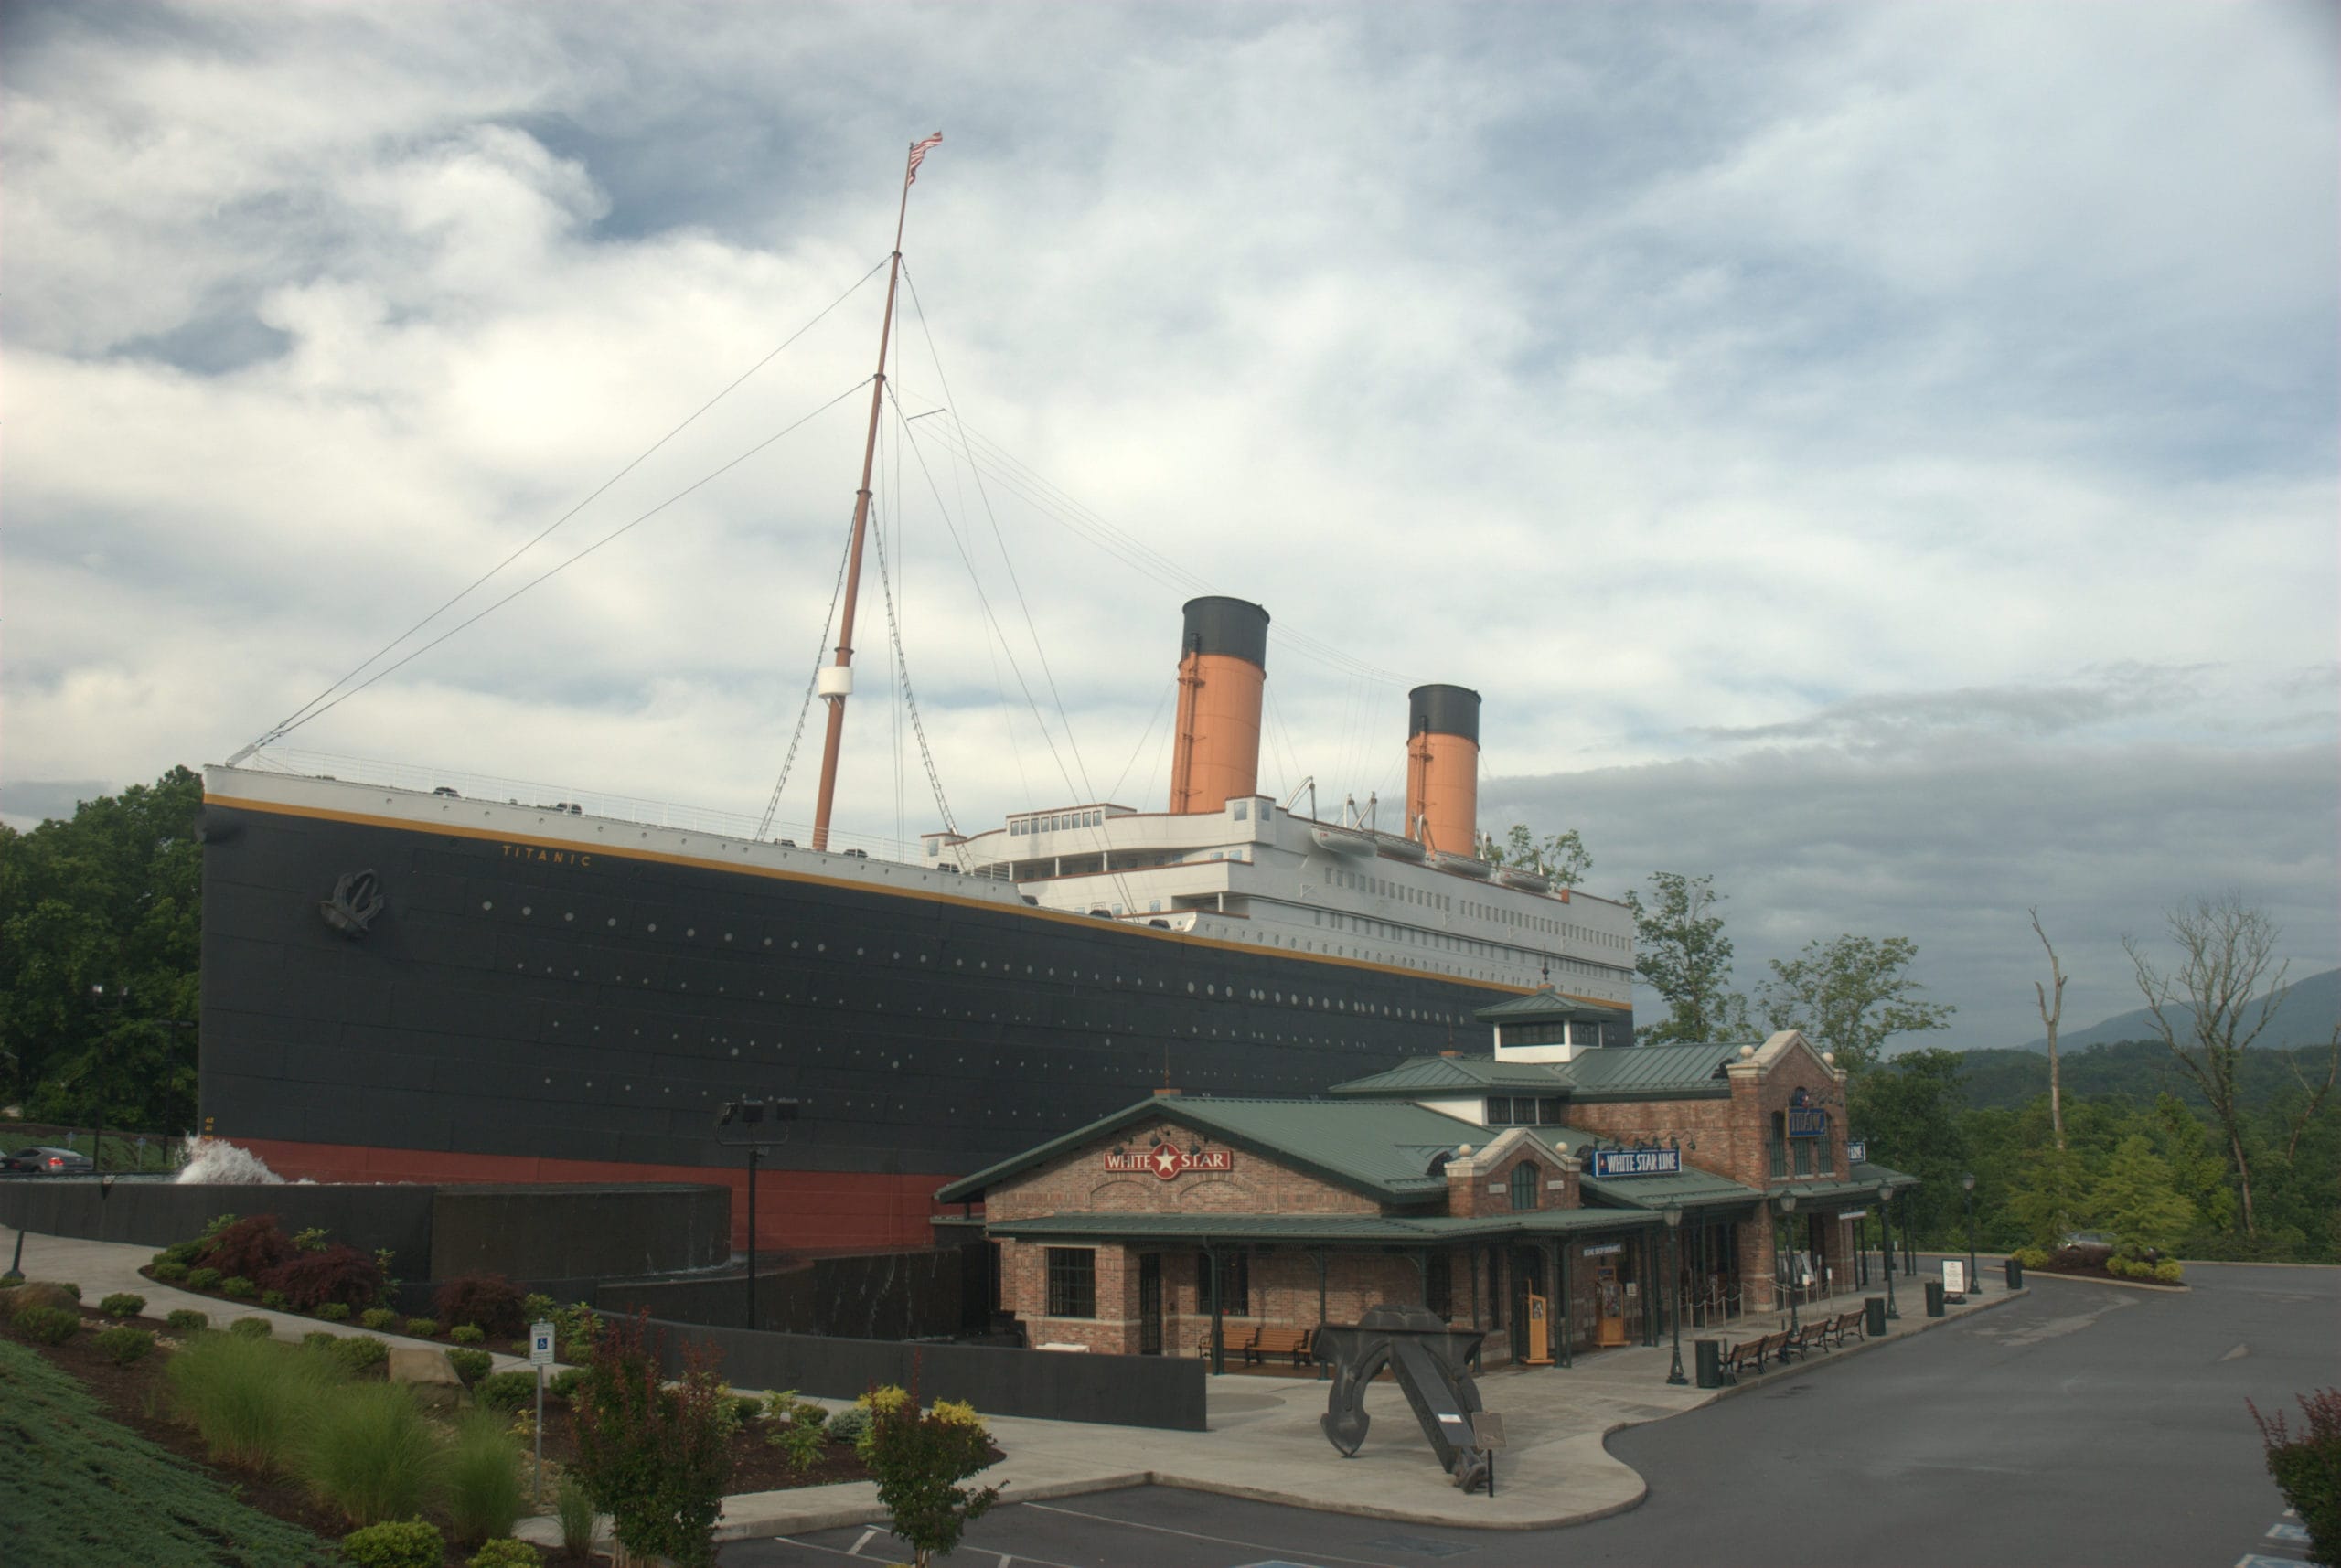 Pigeon Forge, Tenn., located just outside the Great Smoky Mountain National Park, has attractions like the Titanic, which are fun for the whole family. 